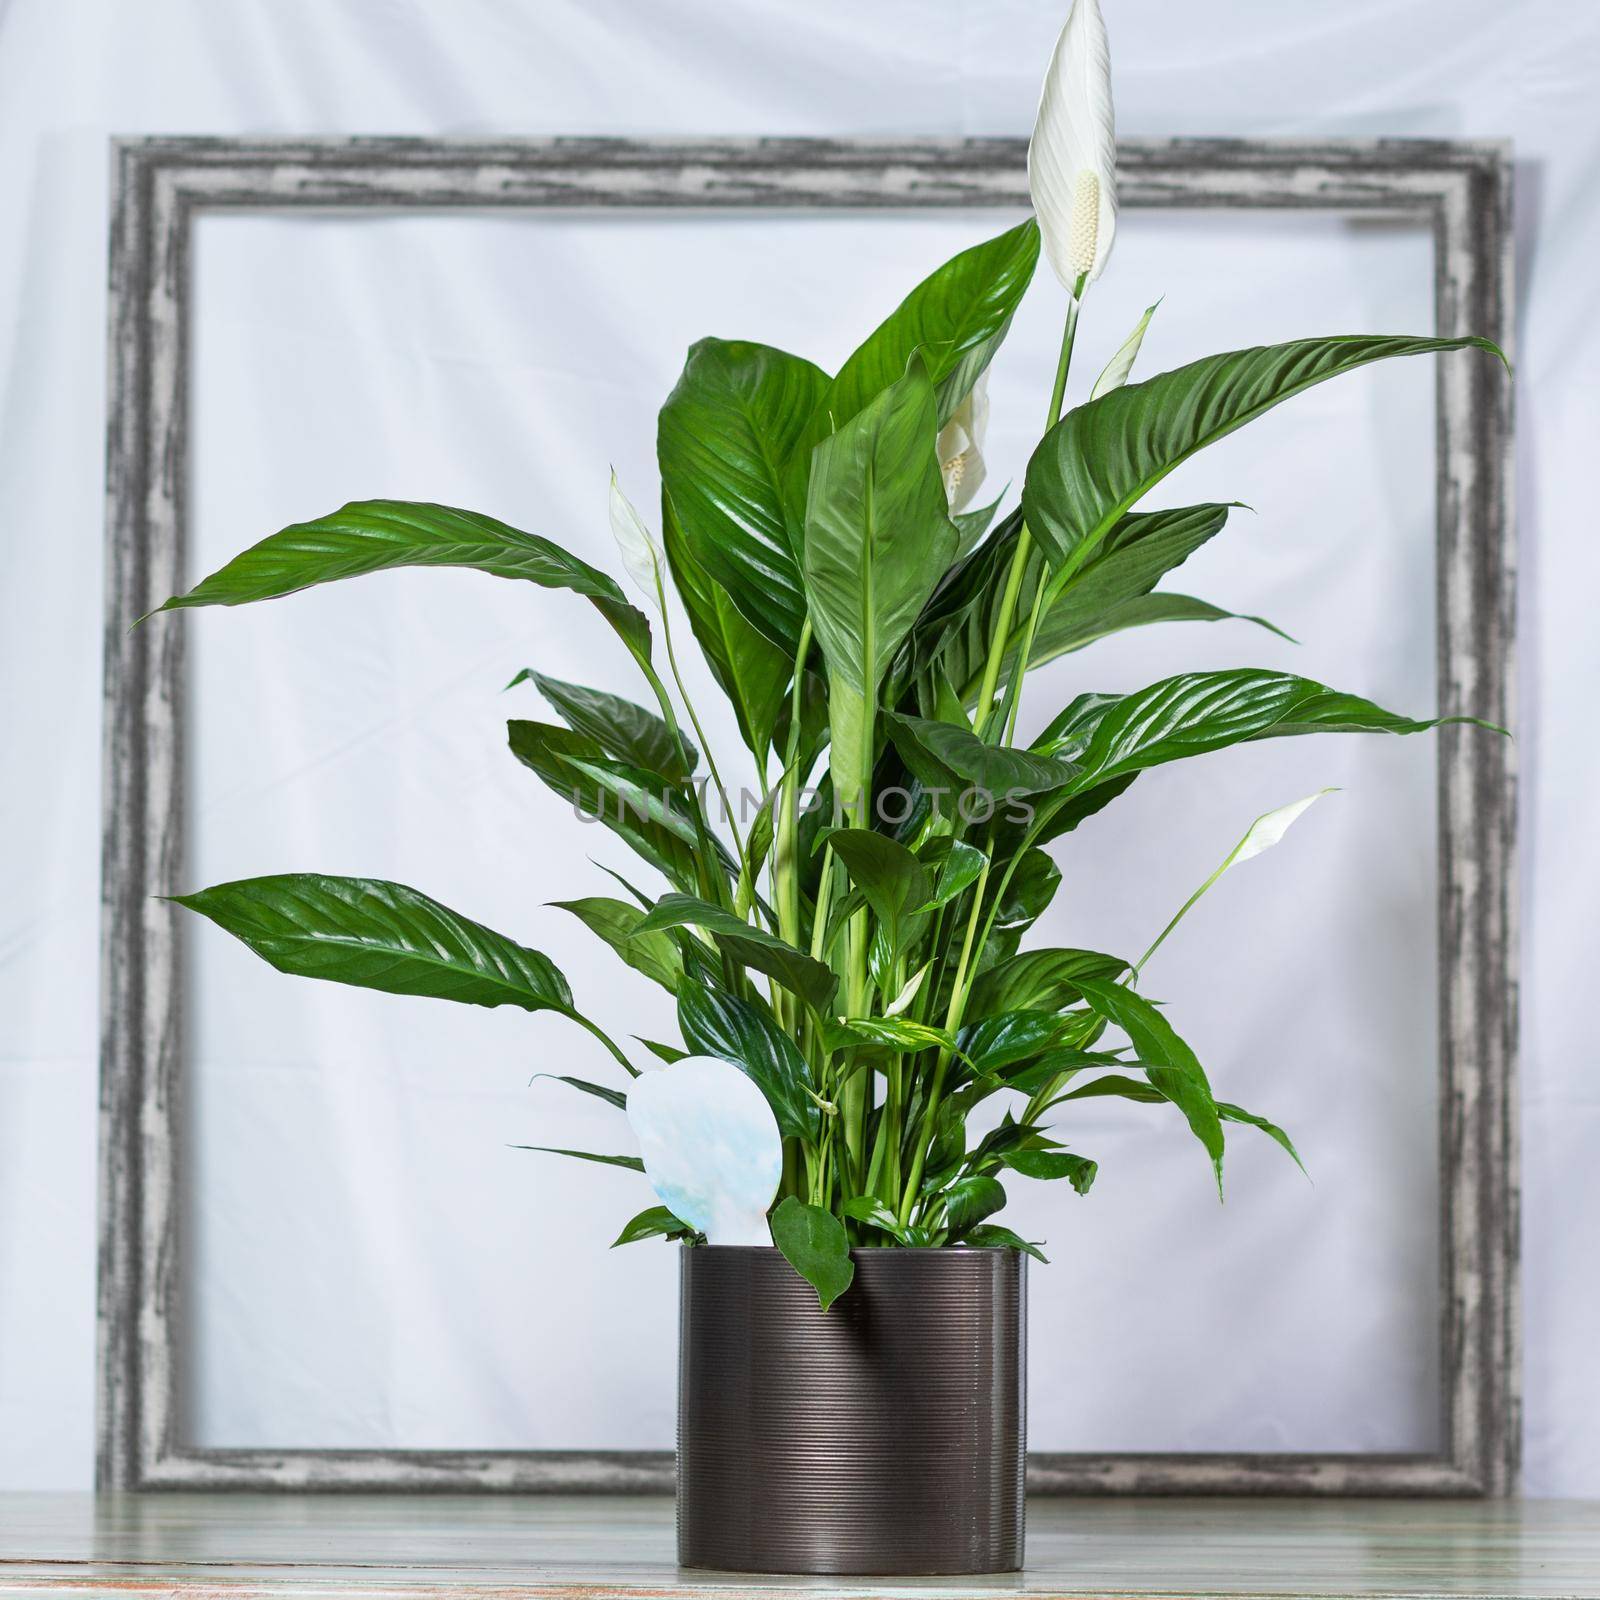 Peace lily, Spathiphyllum, Women's happiness in the black pot, frame background by ferhad